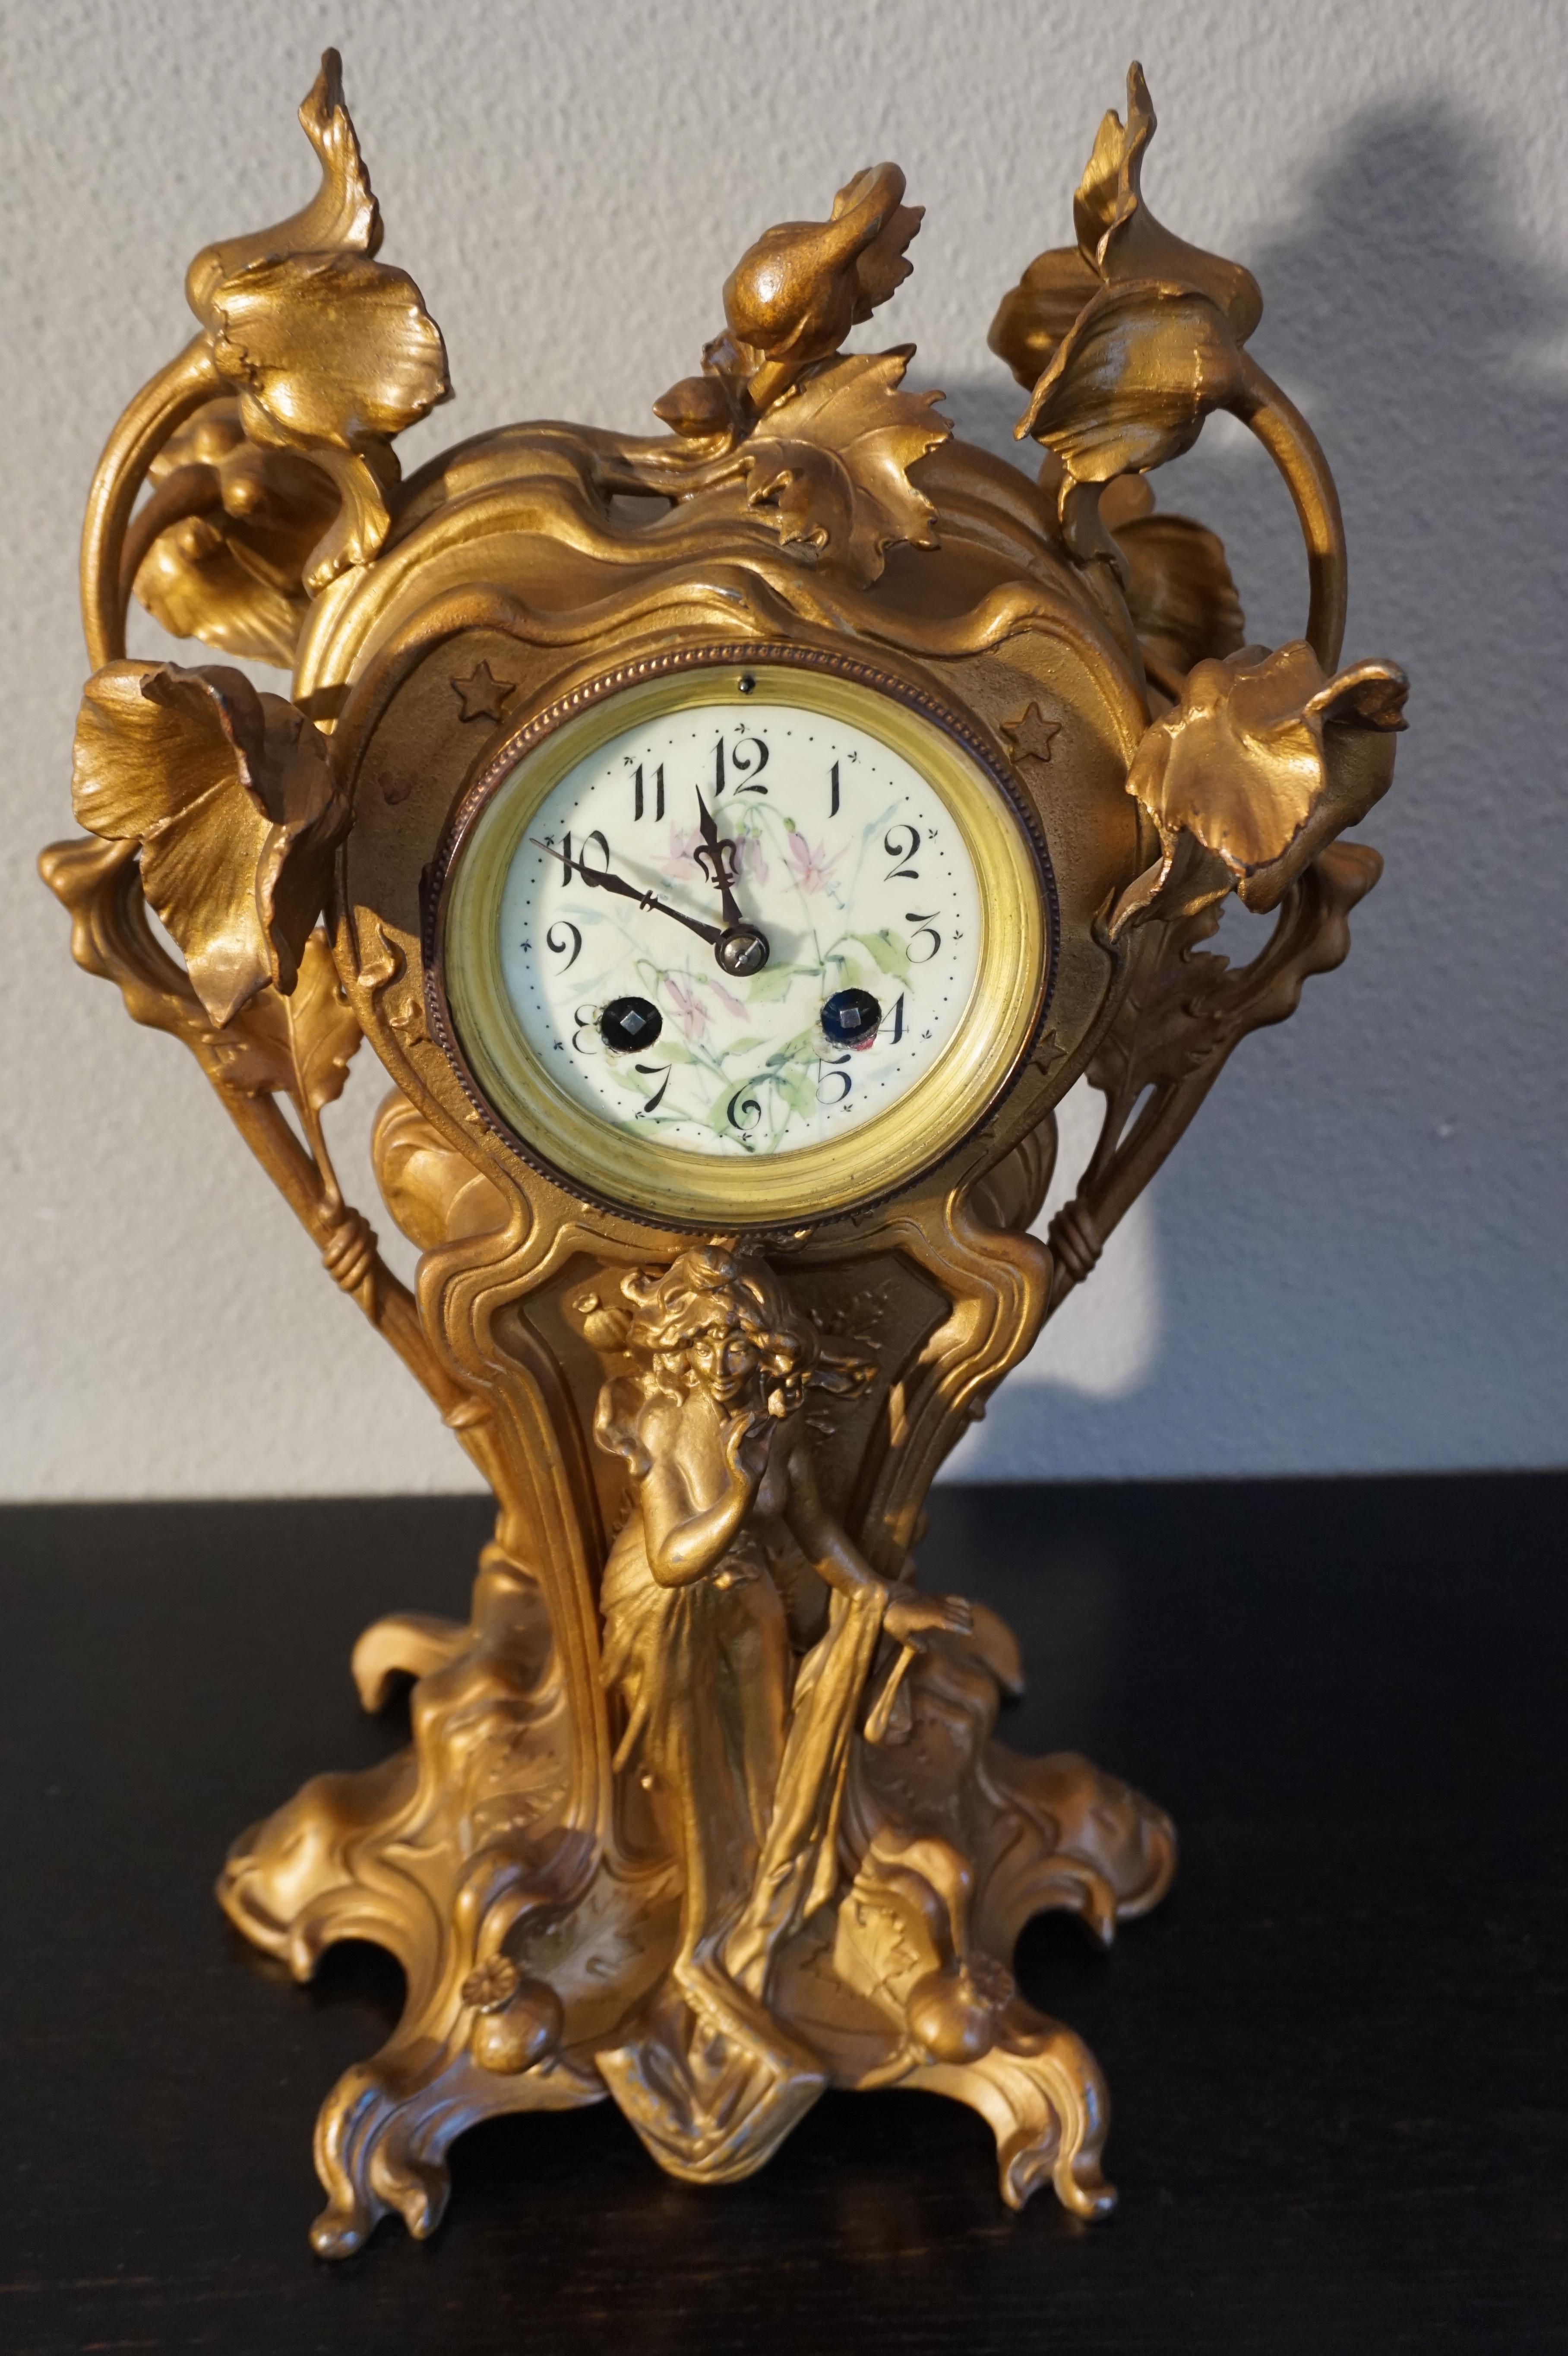 Stunning Early 20th Century Golden Color Art Nouveau Table or Mantel Clock 10